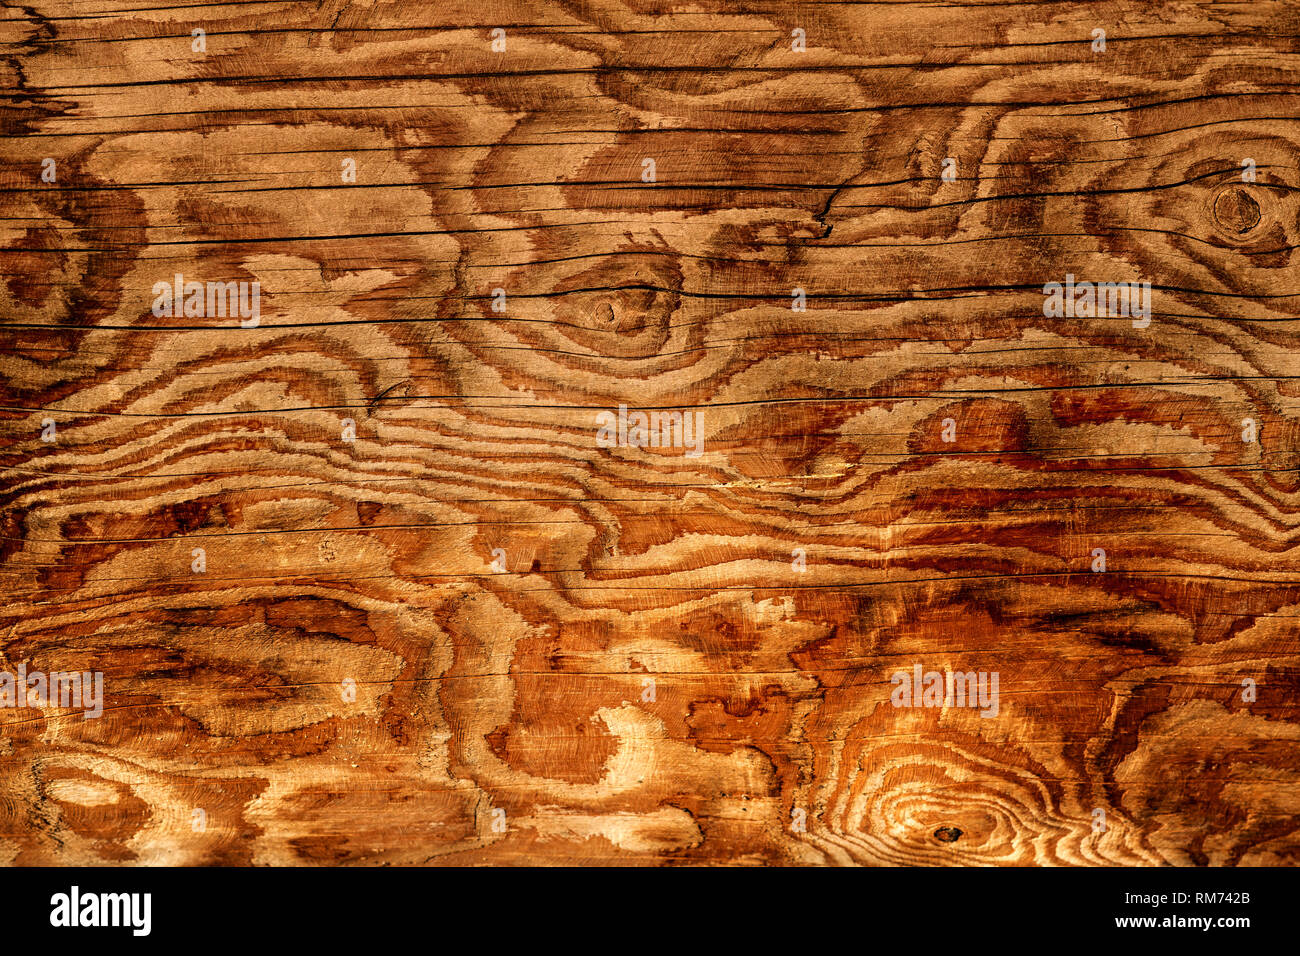 wood grain awesome